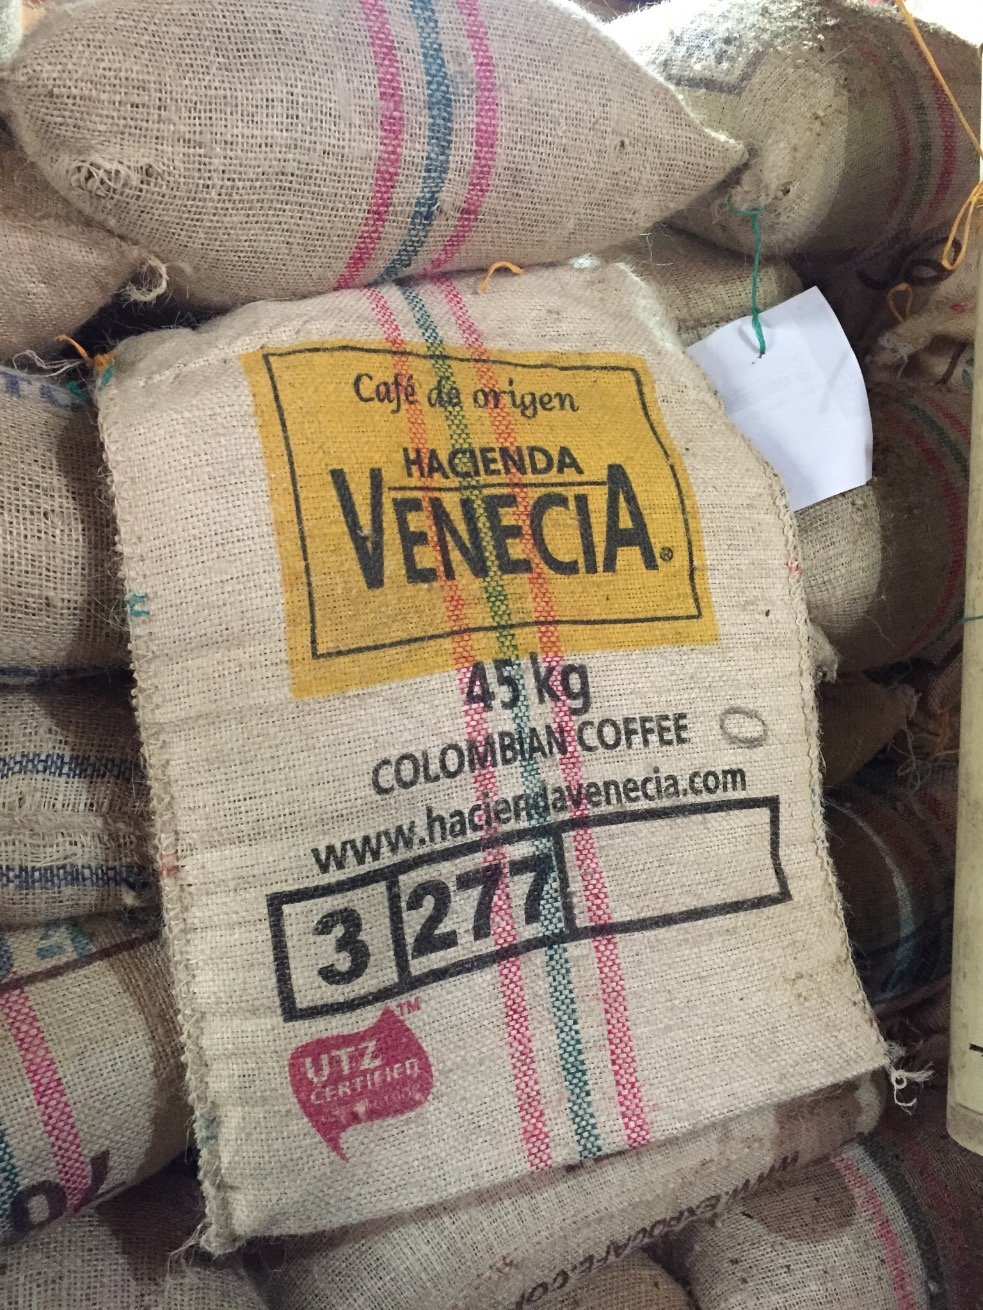 Come and experience a traditional Colombian coffee farm! We offer informative and interactive tours, as well as budget and boutique accommodation.